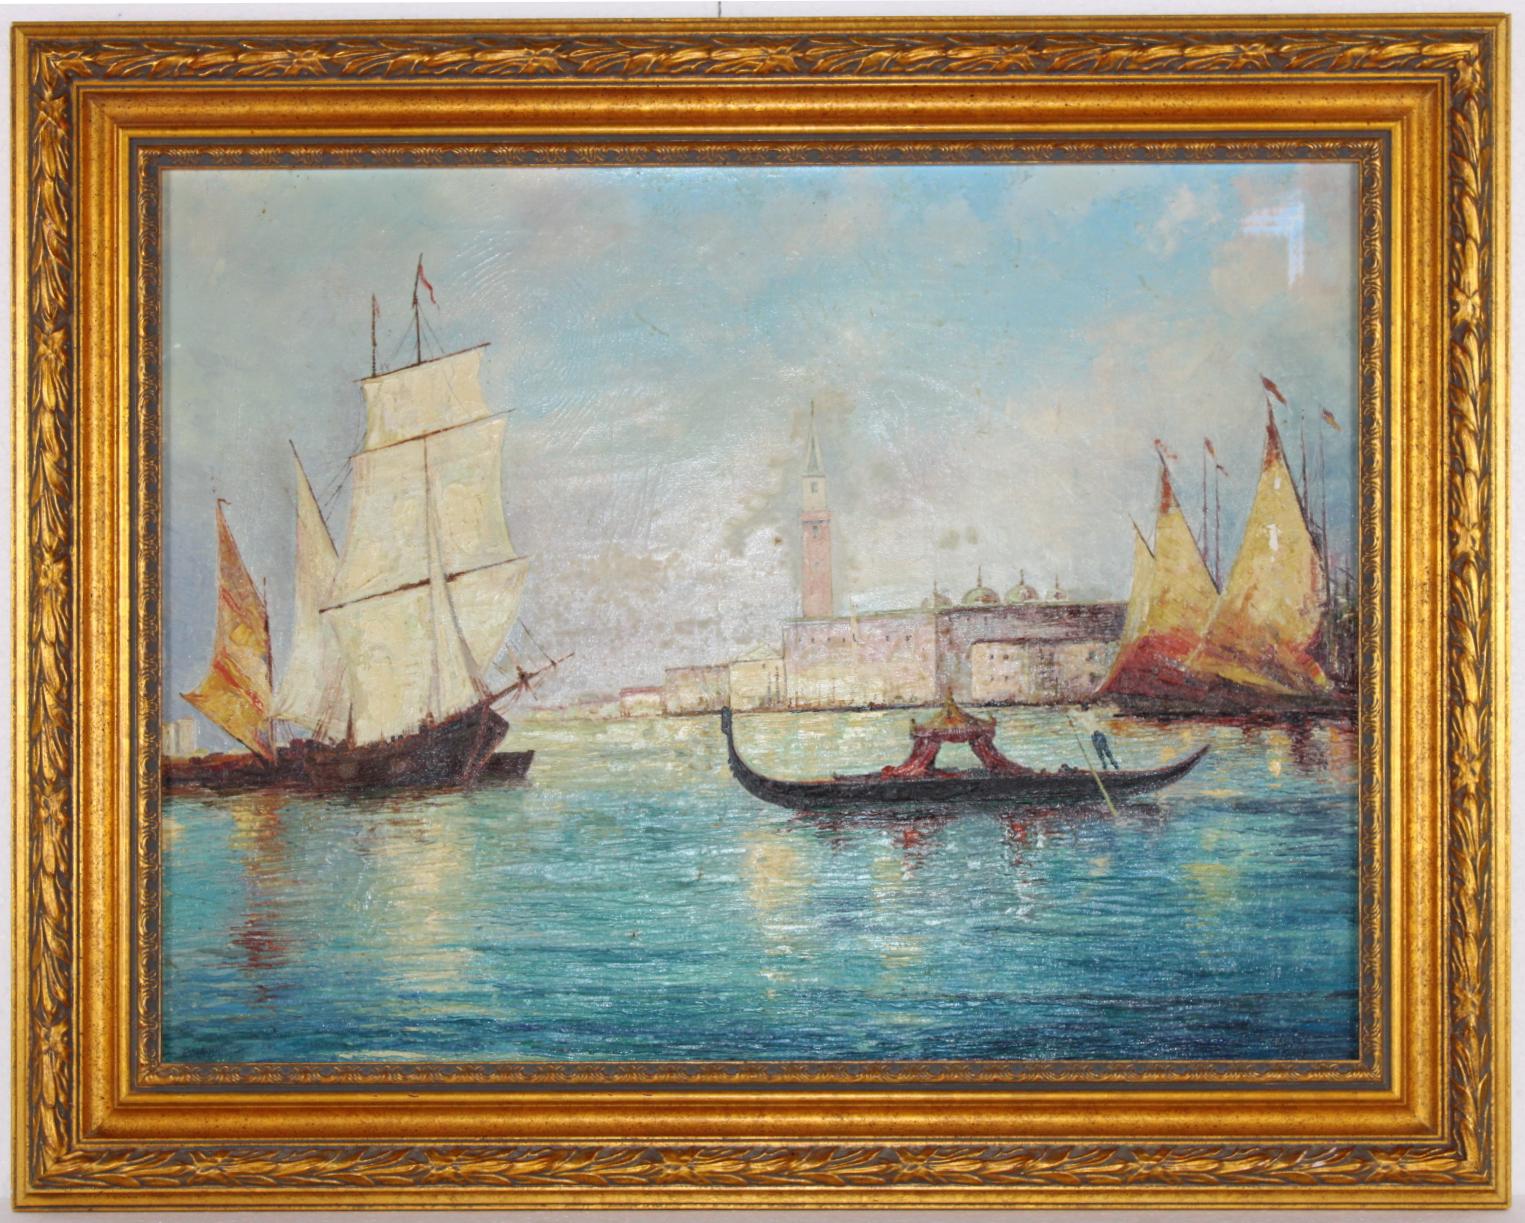 View of Venice, Original Antique Oil on Canvas, Impressionist, Large, Signed